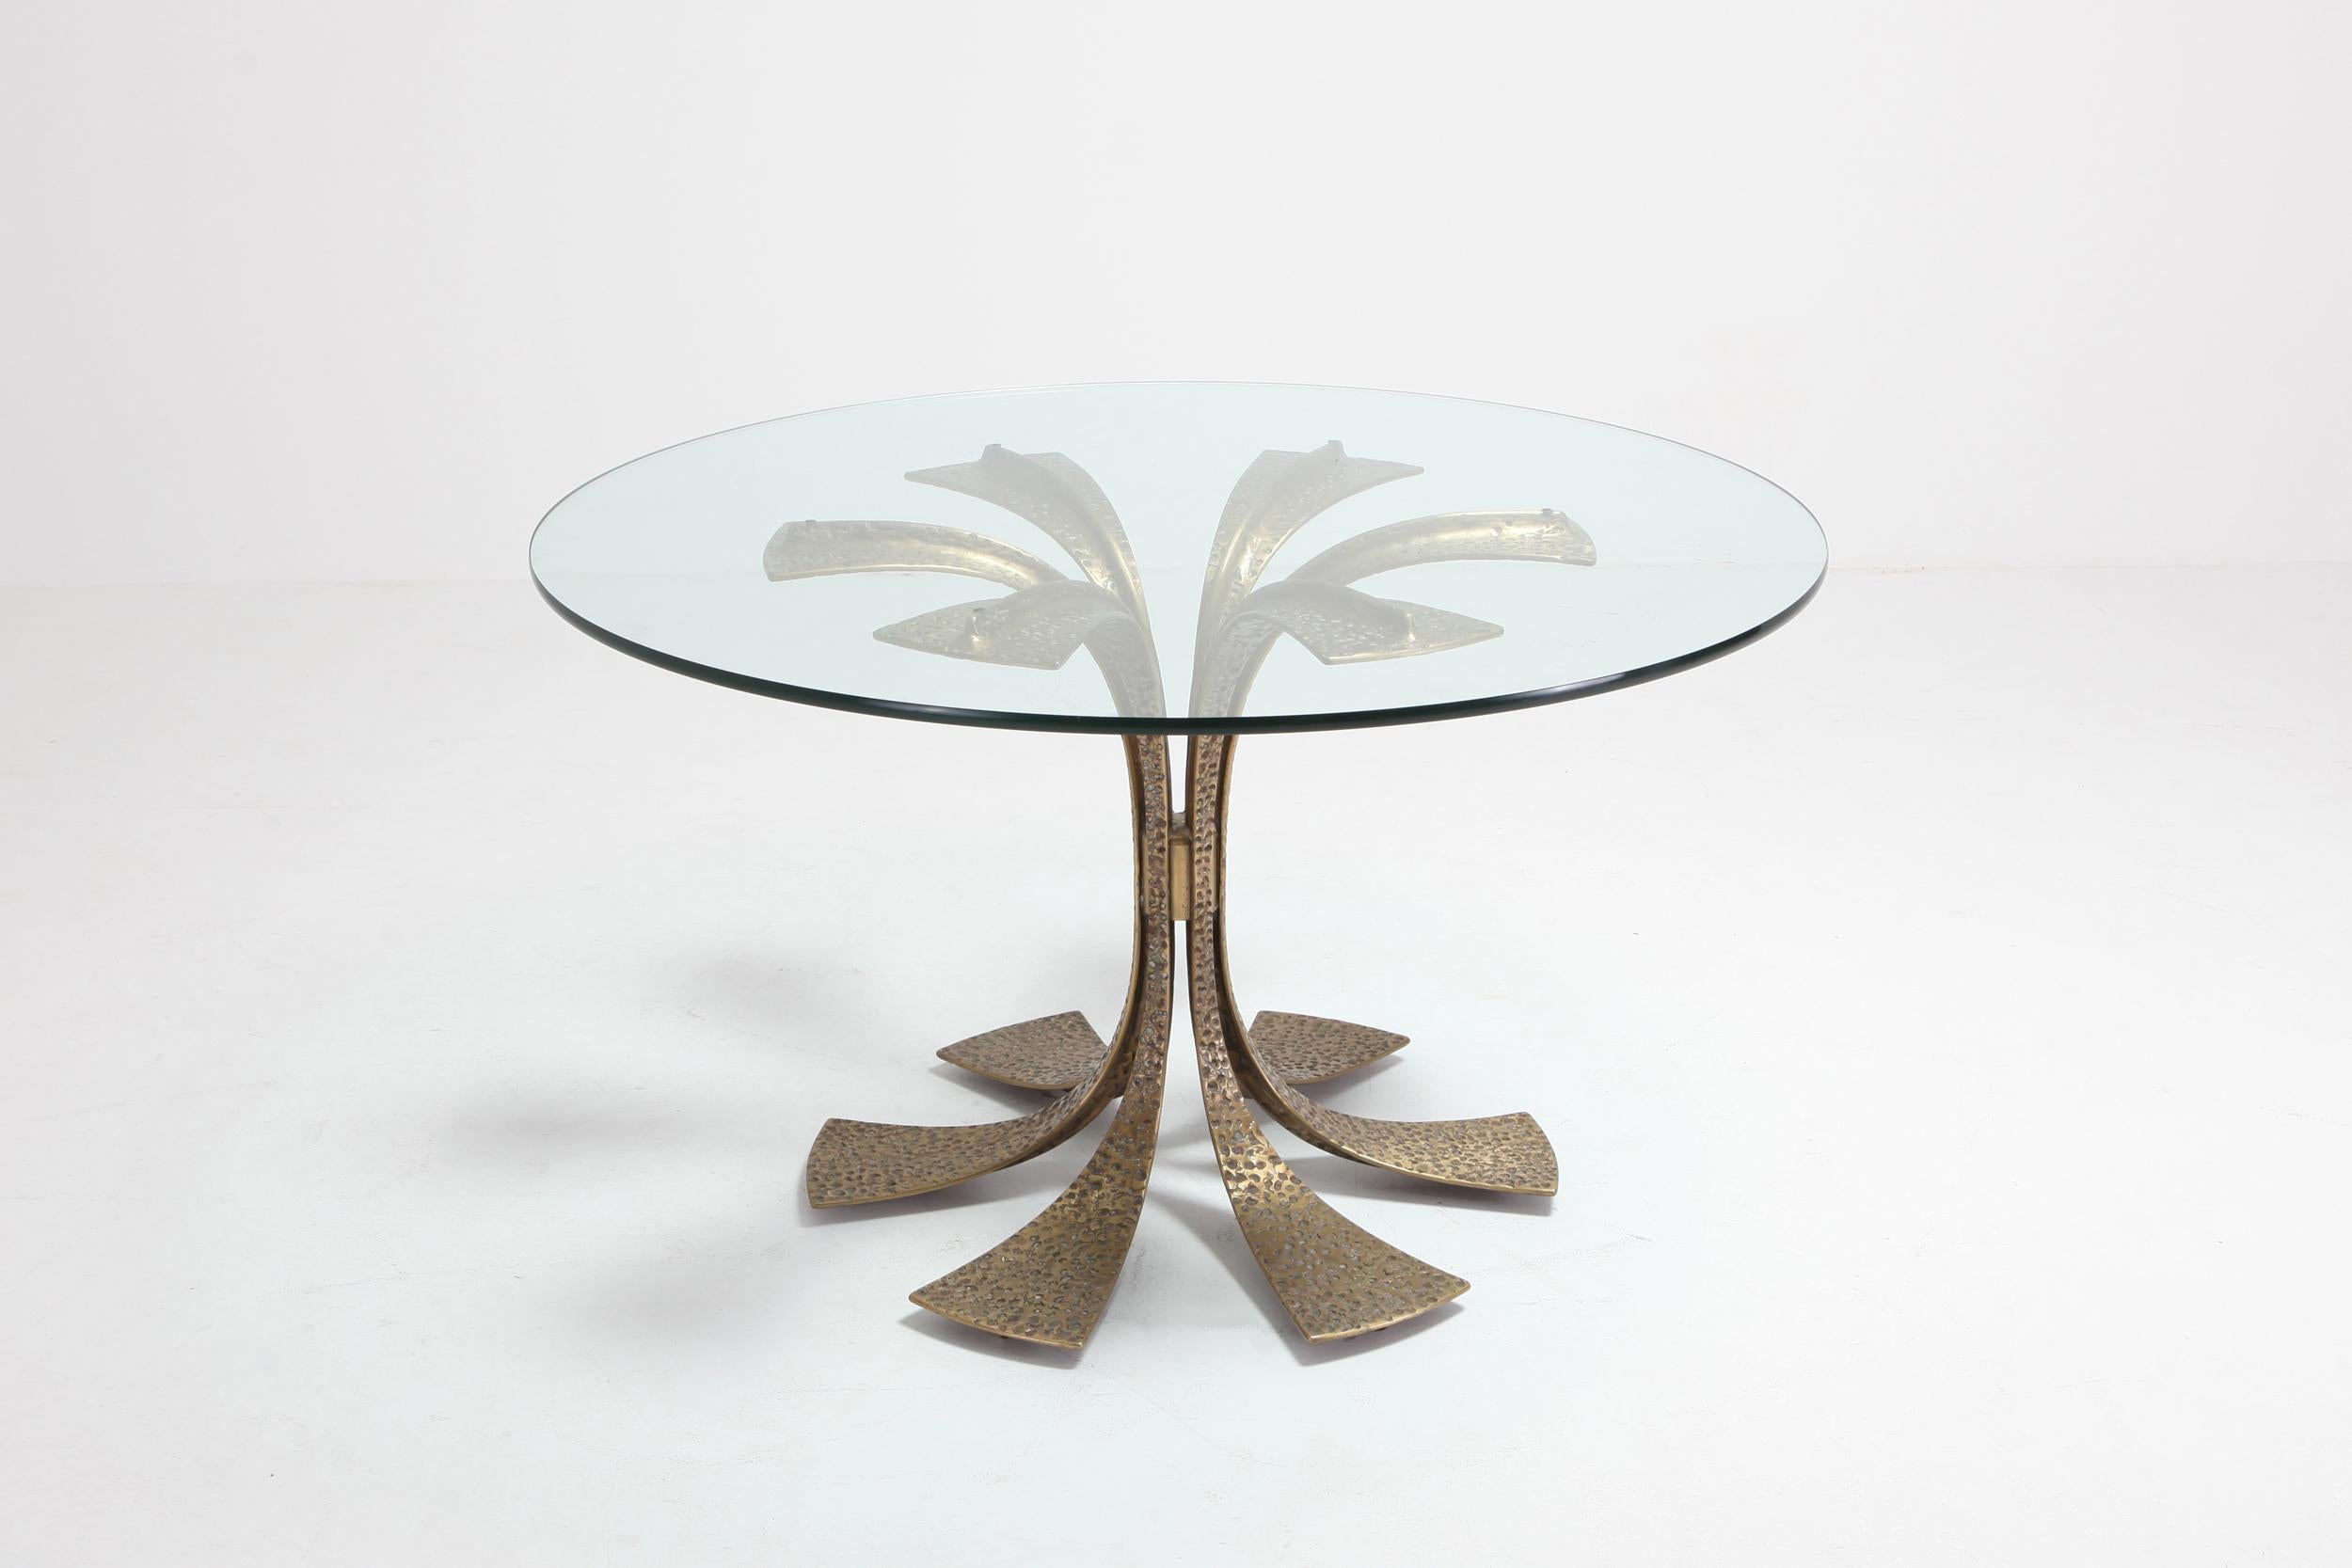 Brass dining table with a clear glass top by Luciano Frigerio.

Fits well in an eclectic Hollywood Regency inspired interior.

Frequent visits to prestigious craftsmen’s studios like Canturine, where he often met Masters like Gio' Ponti, Franco